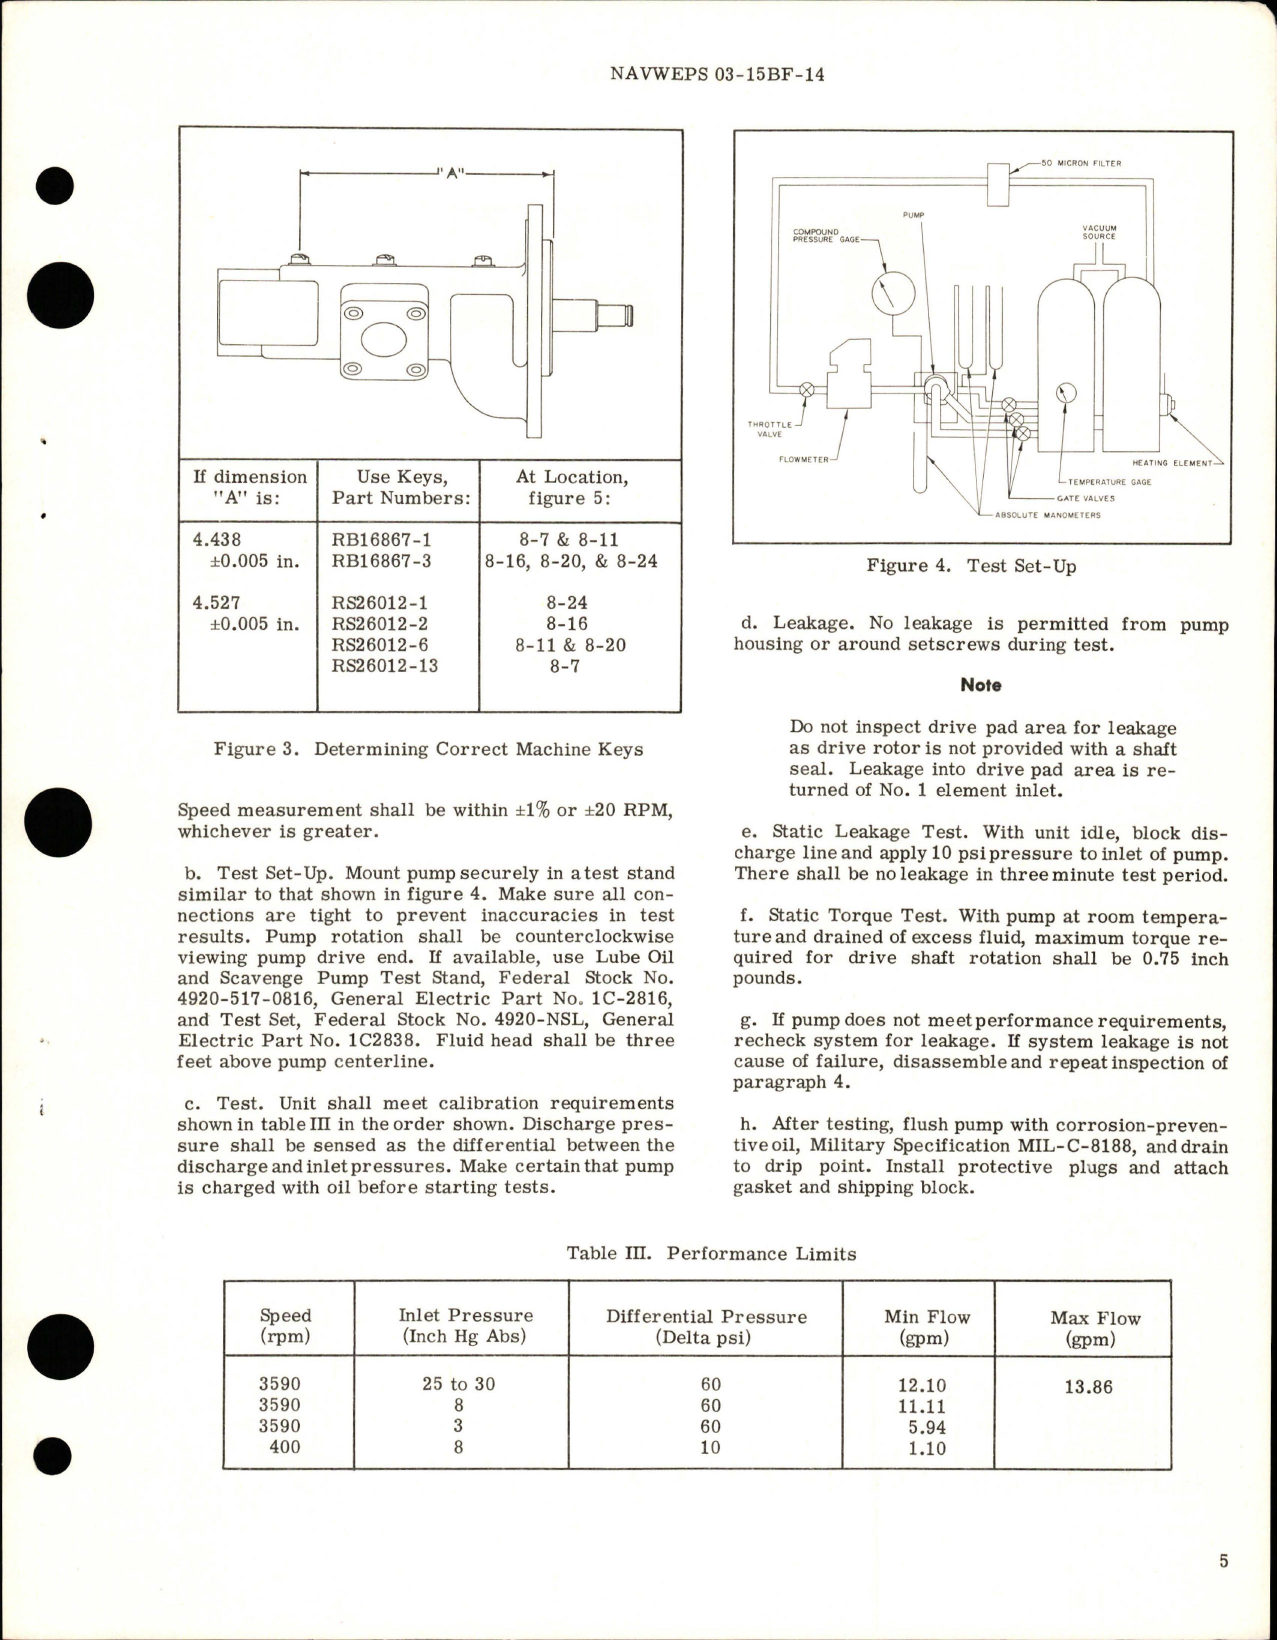 Sample page 5 from AirCorps Library document: Overhaul Instructions with Parts for Oil Scavenge Pump - Model RG16020D